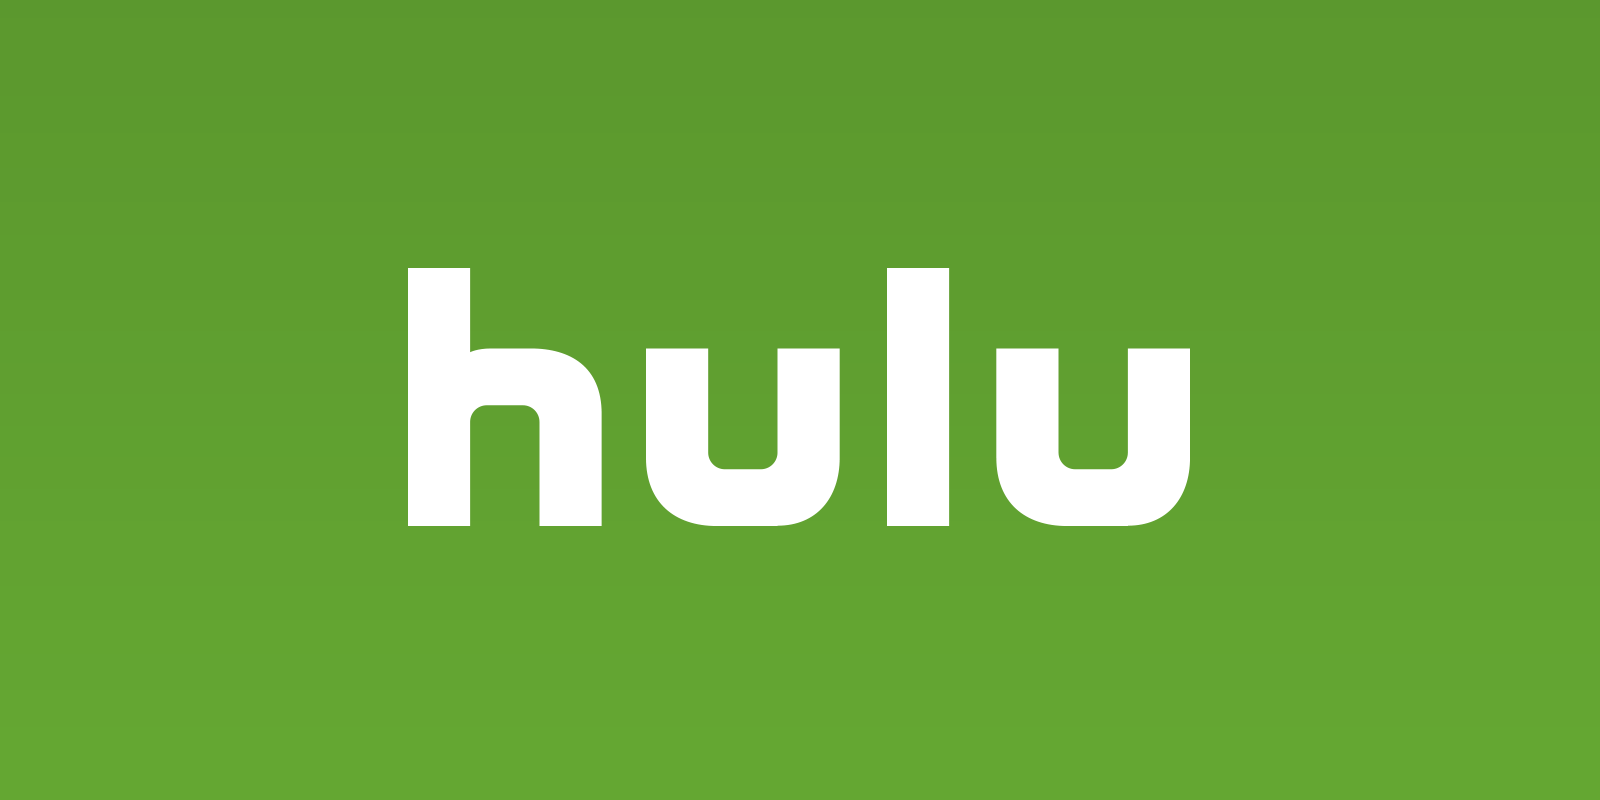 Results image of green and white hulu logo